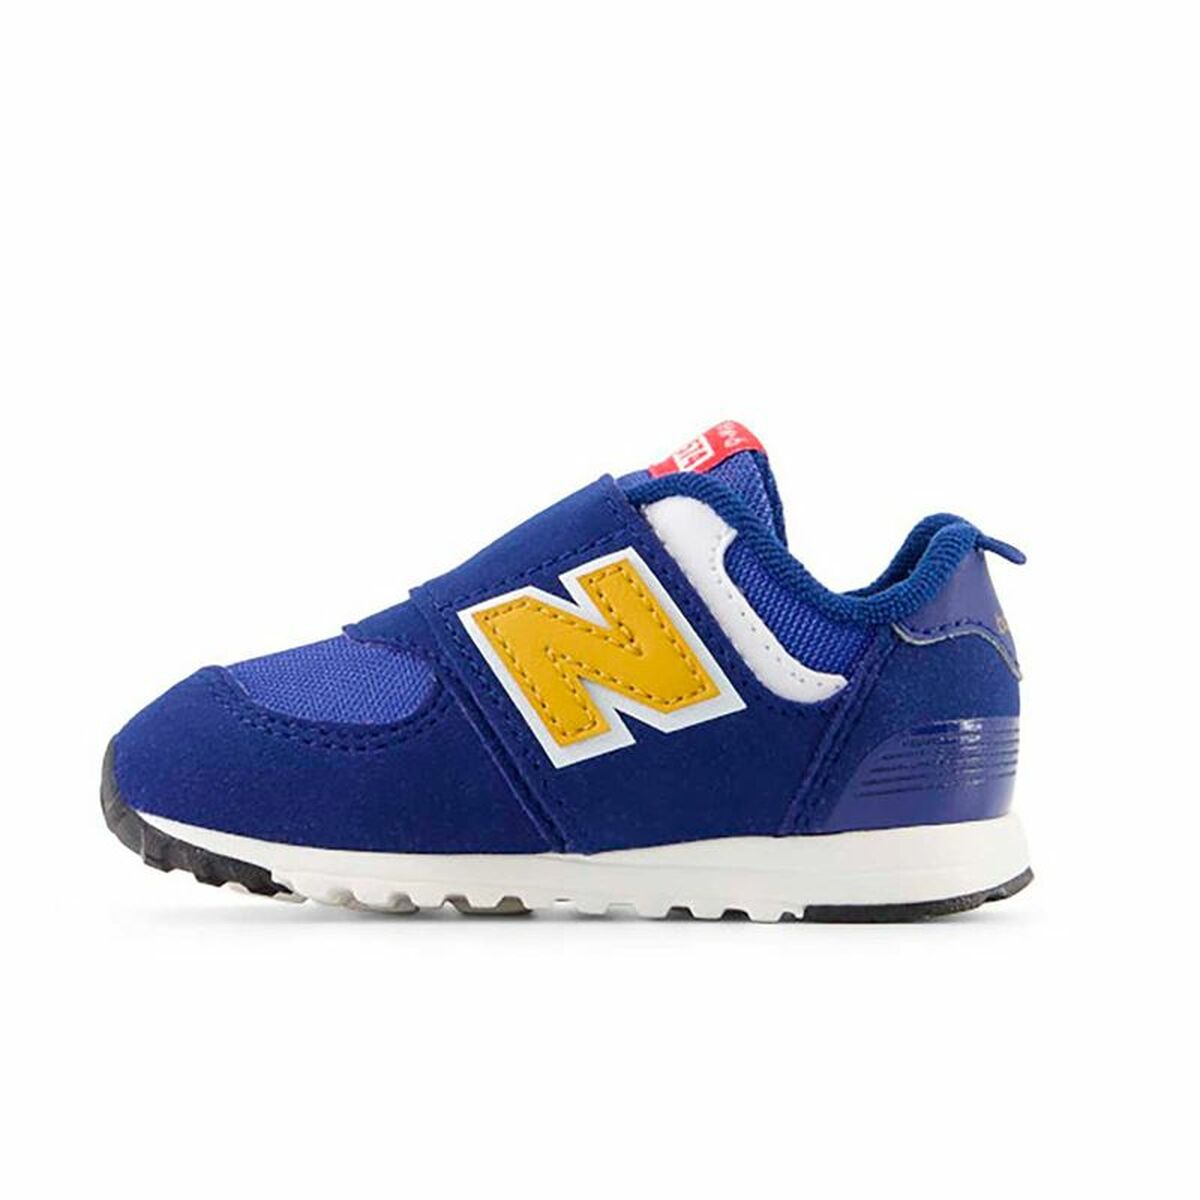 Children’s Casual Trainers New Balance 574 New-B Hook Loop Blue